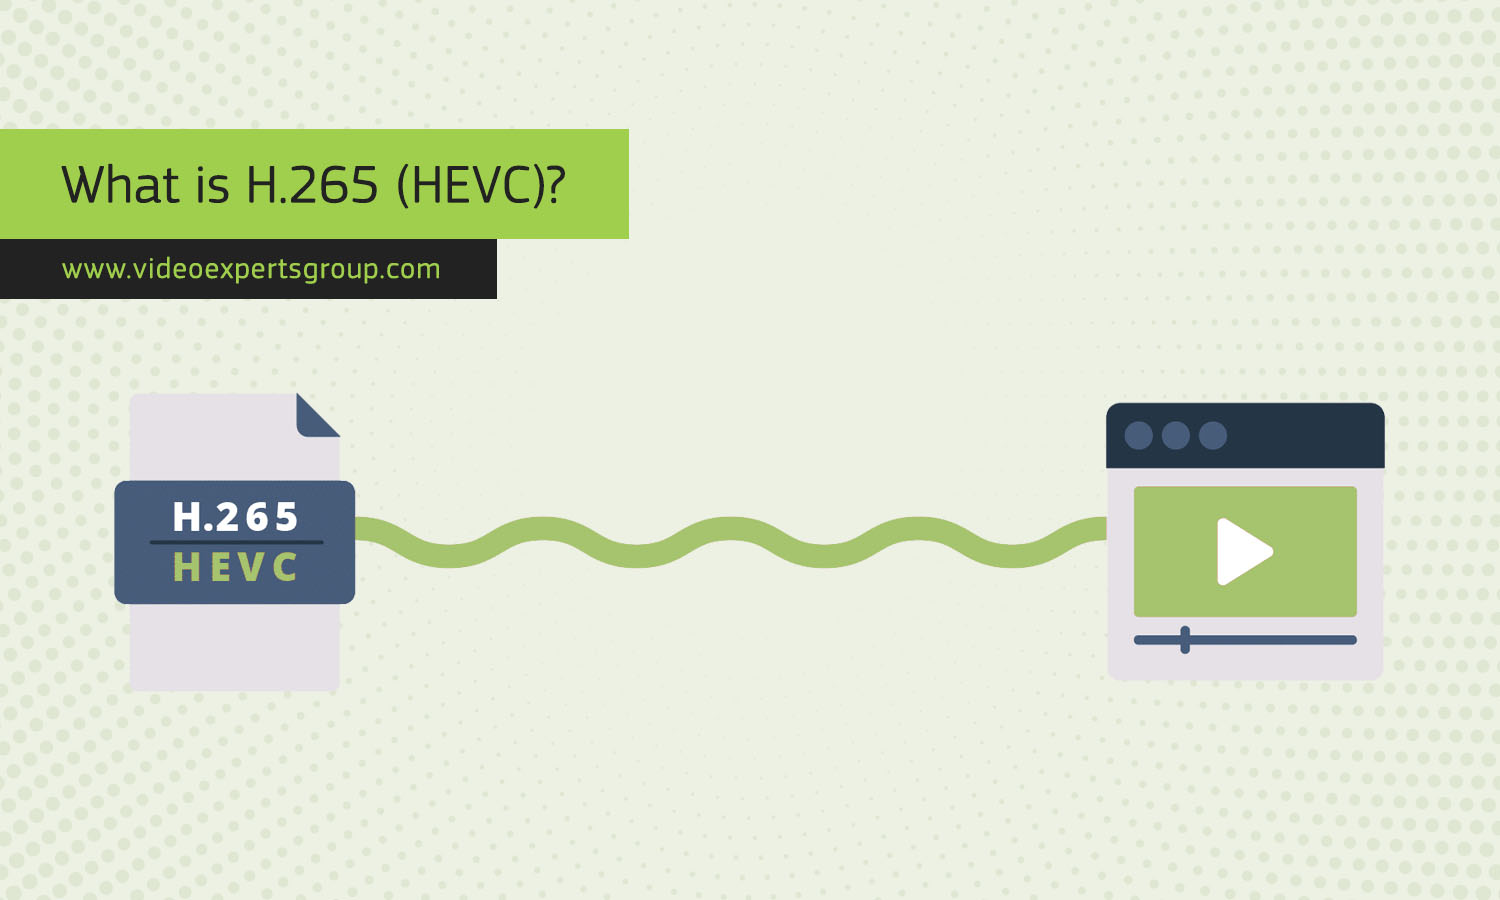 What is H.265 (HEVC)?